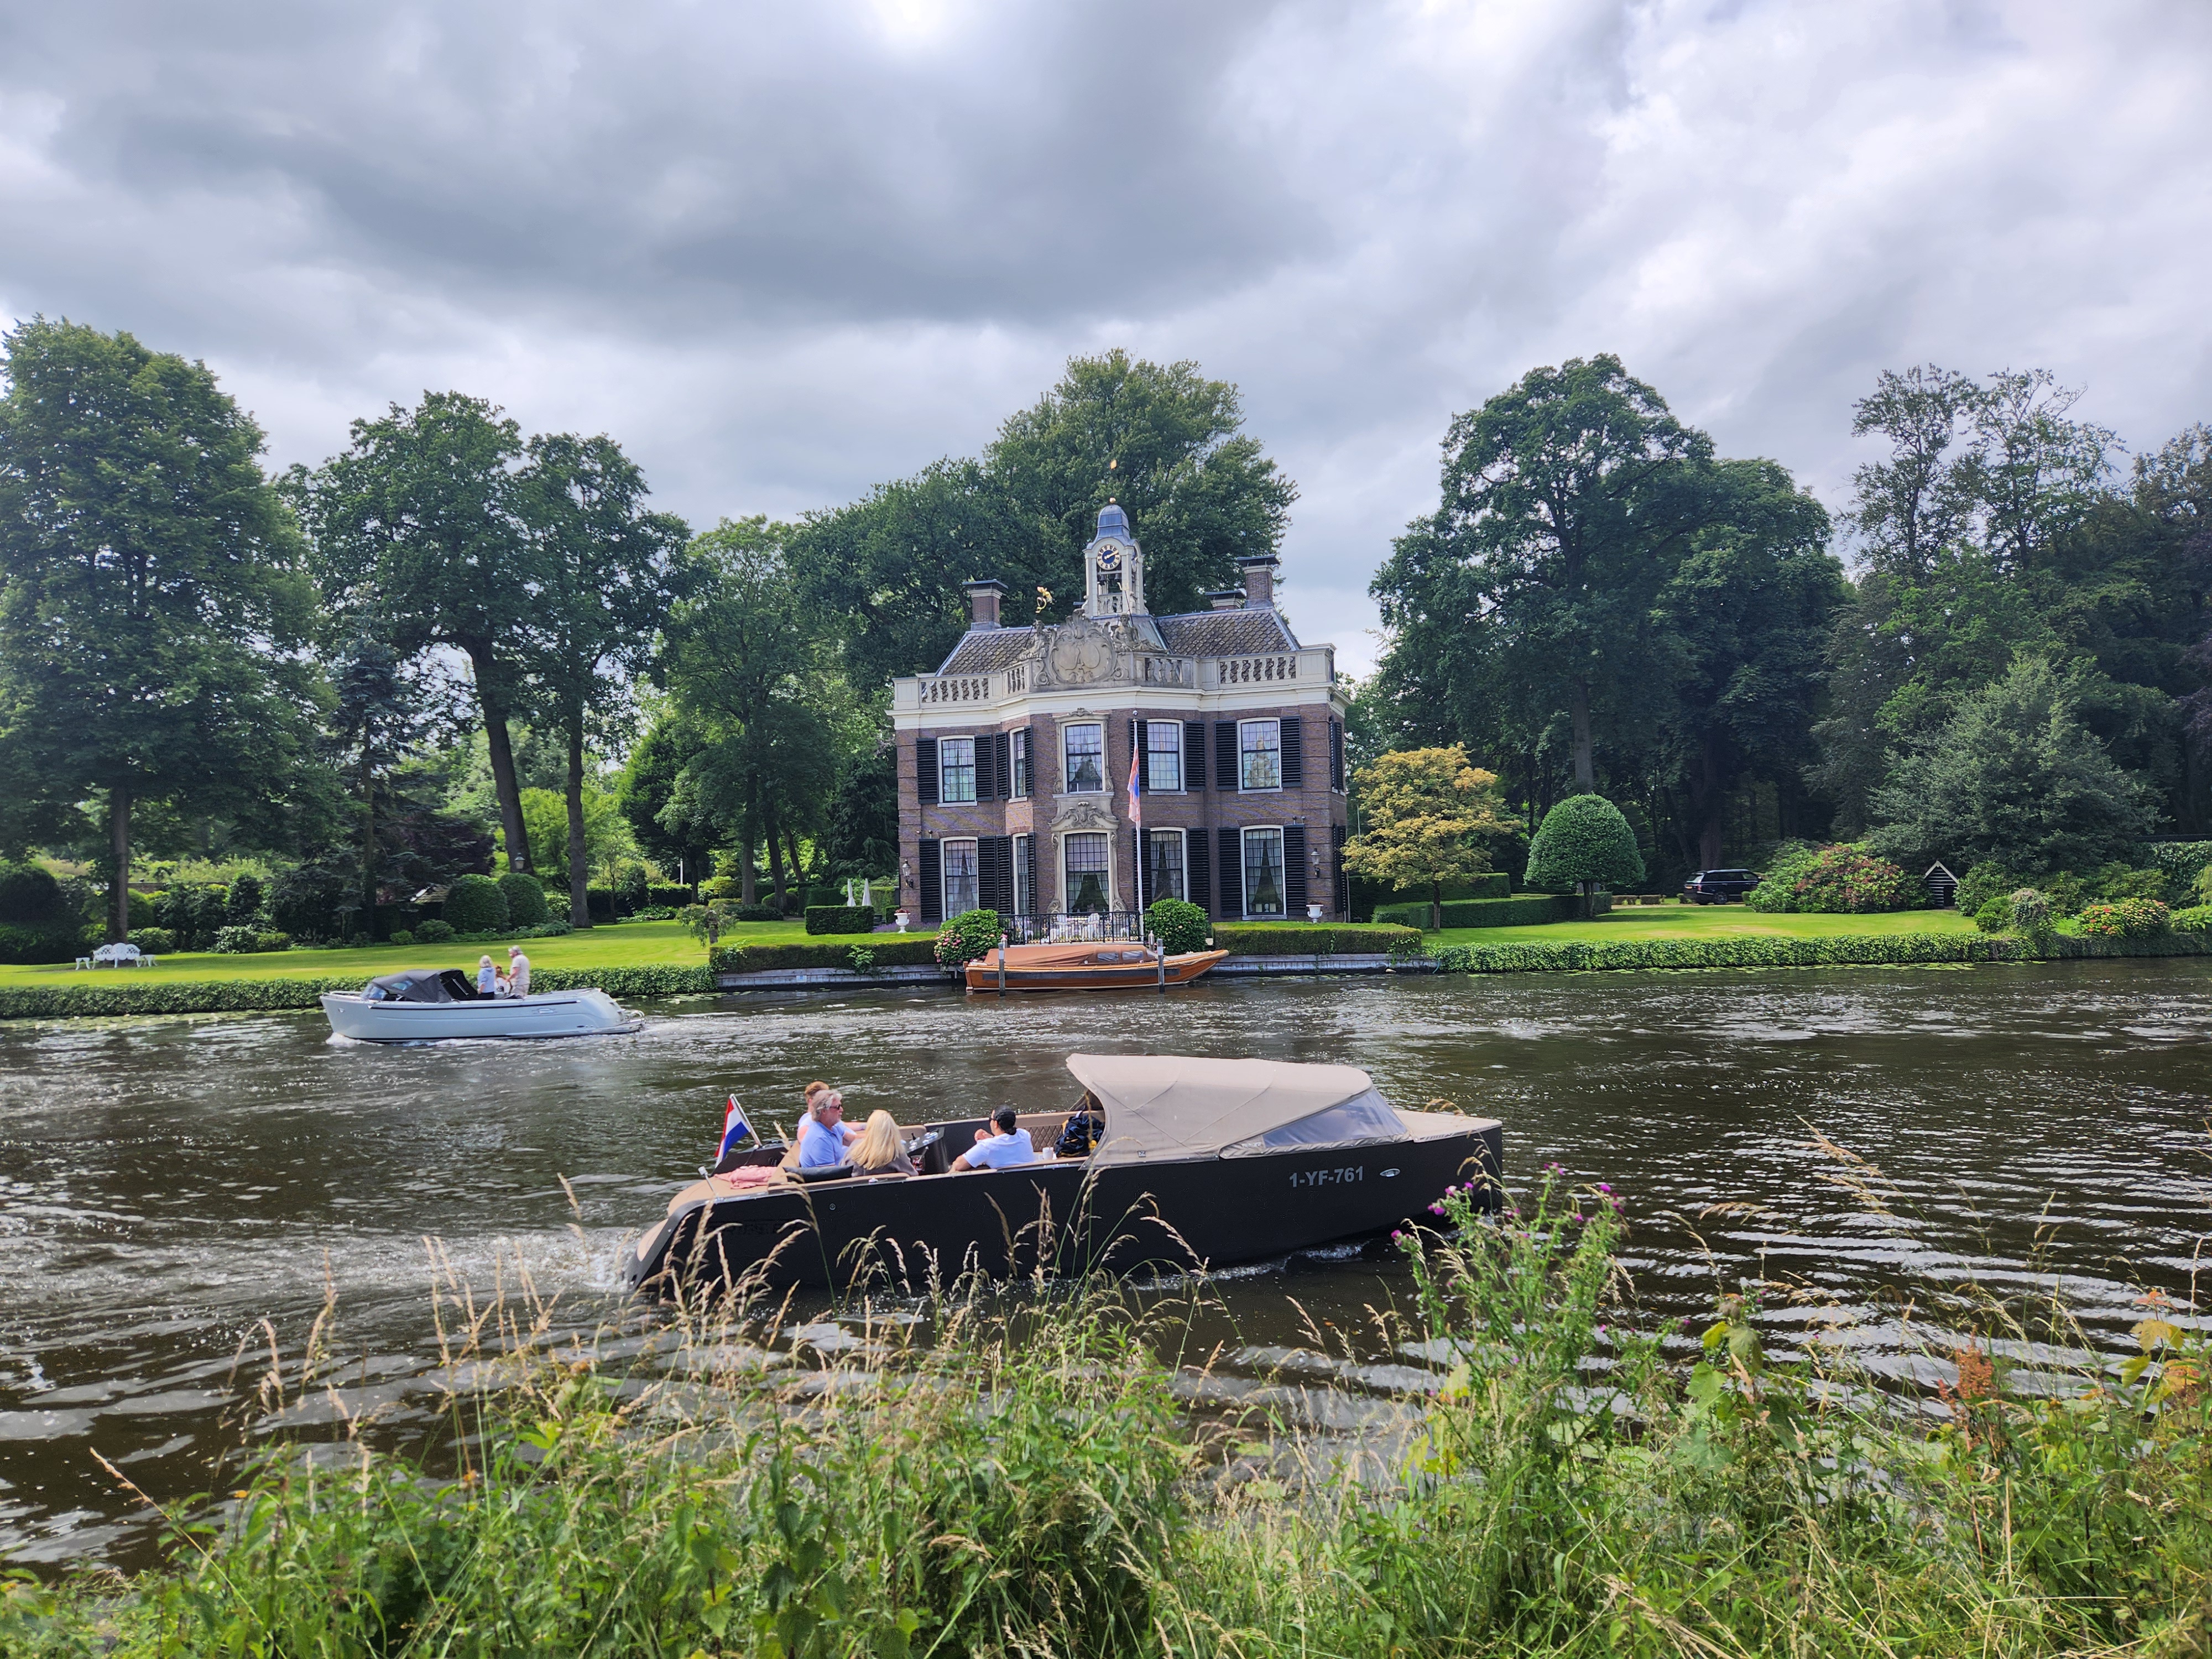 A very posh looking river home in front of the river. In the river is a very posh looking river cruiser with very posh looking people looking like they are having a good time